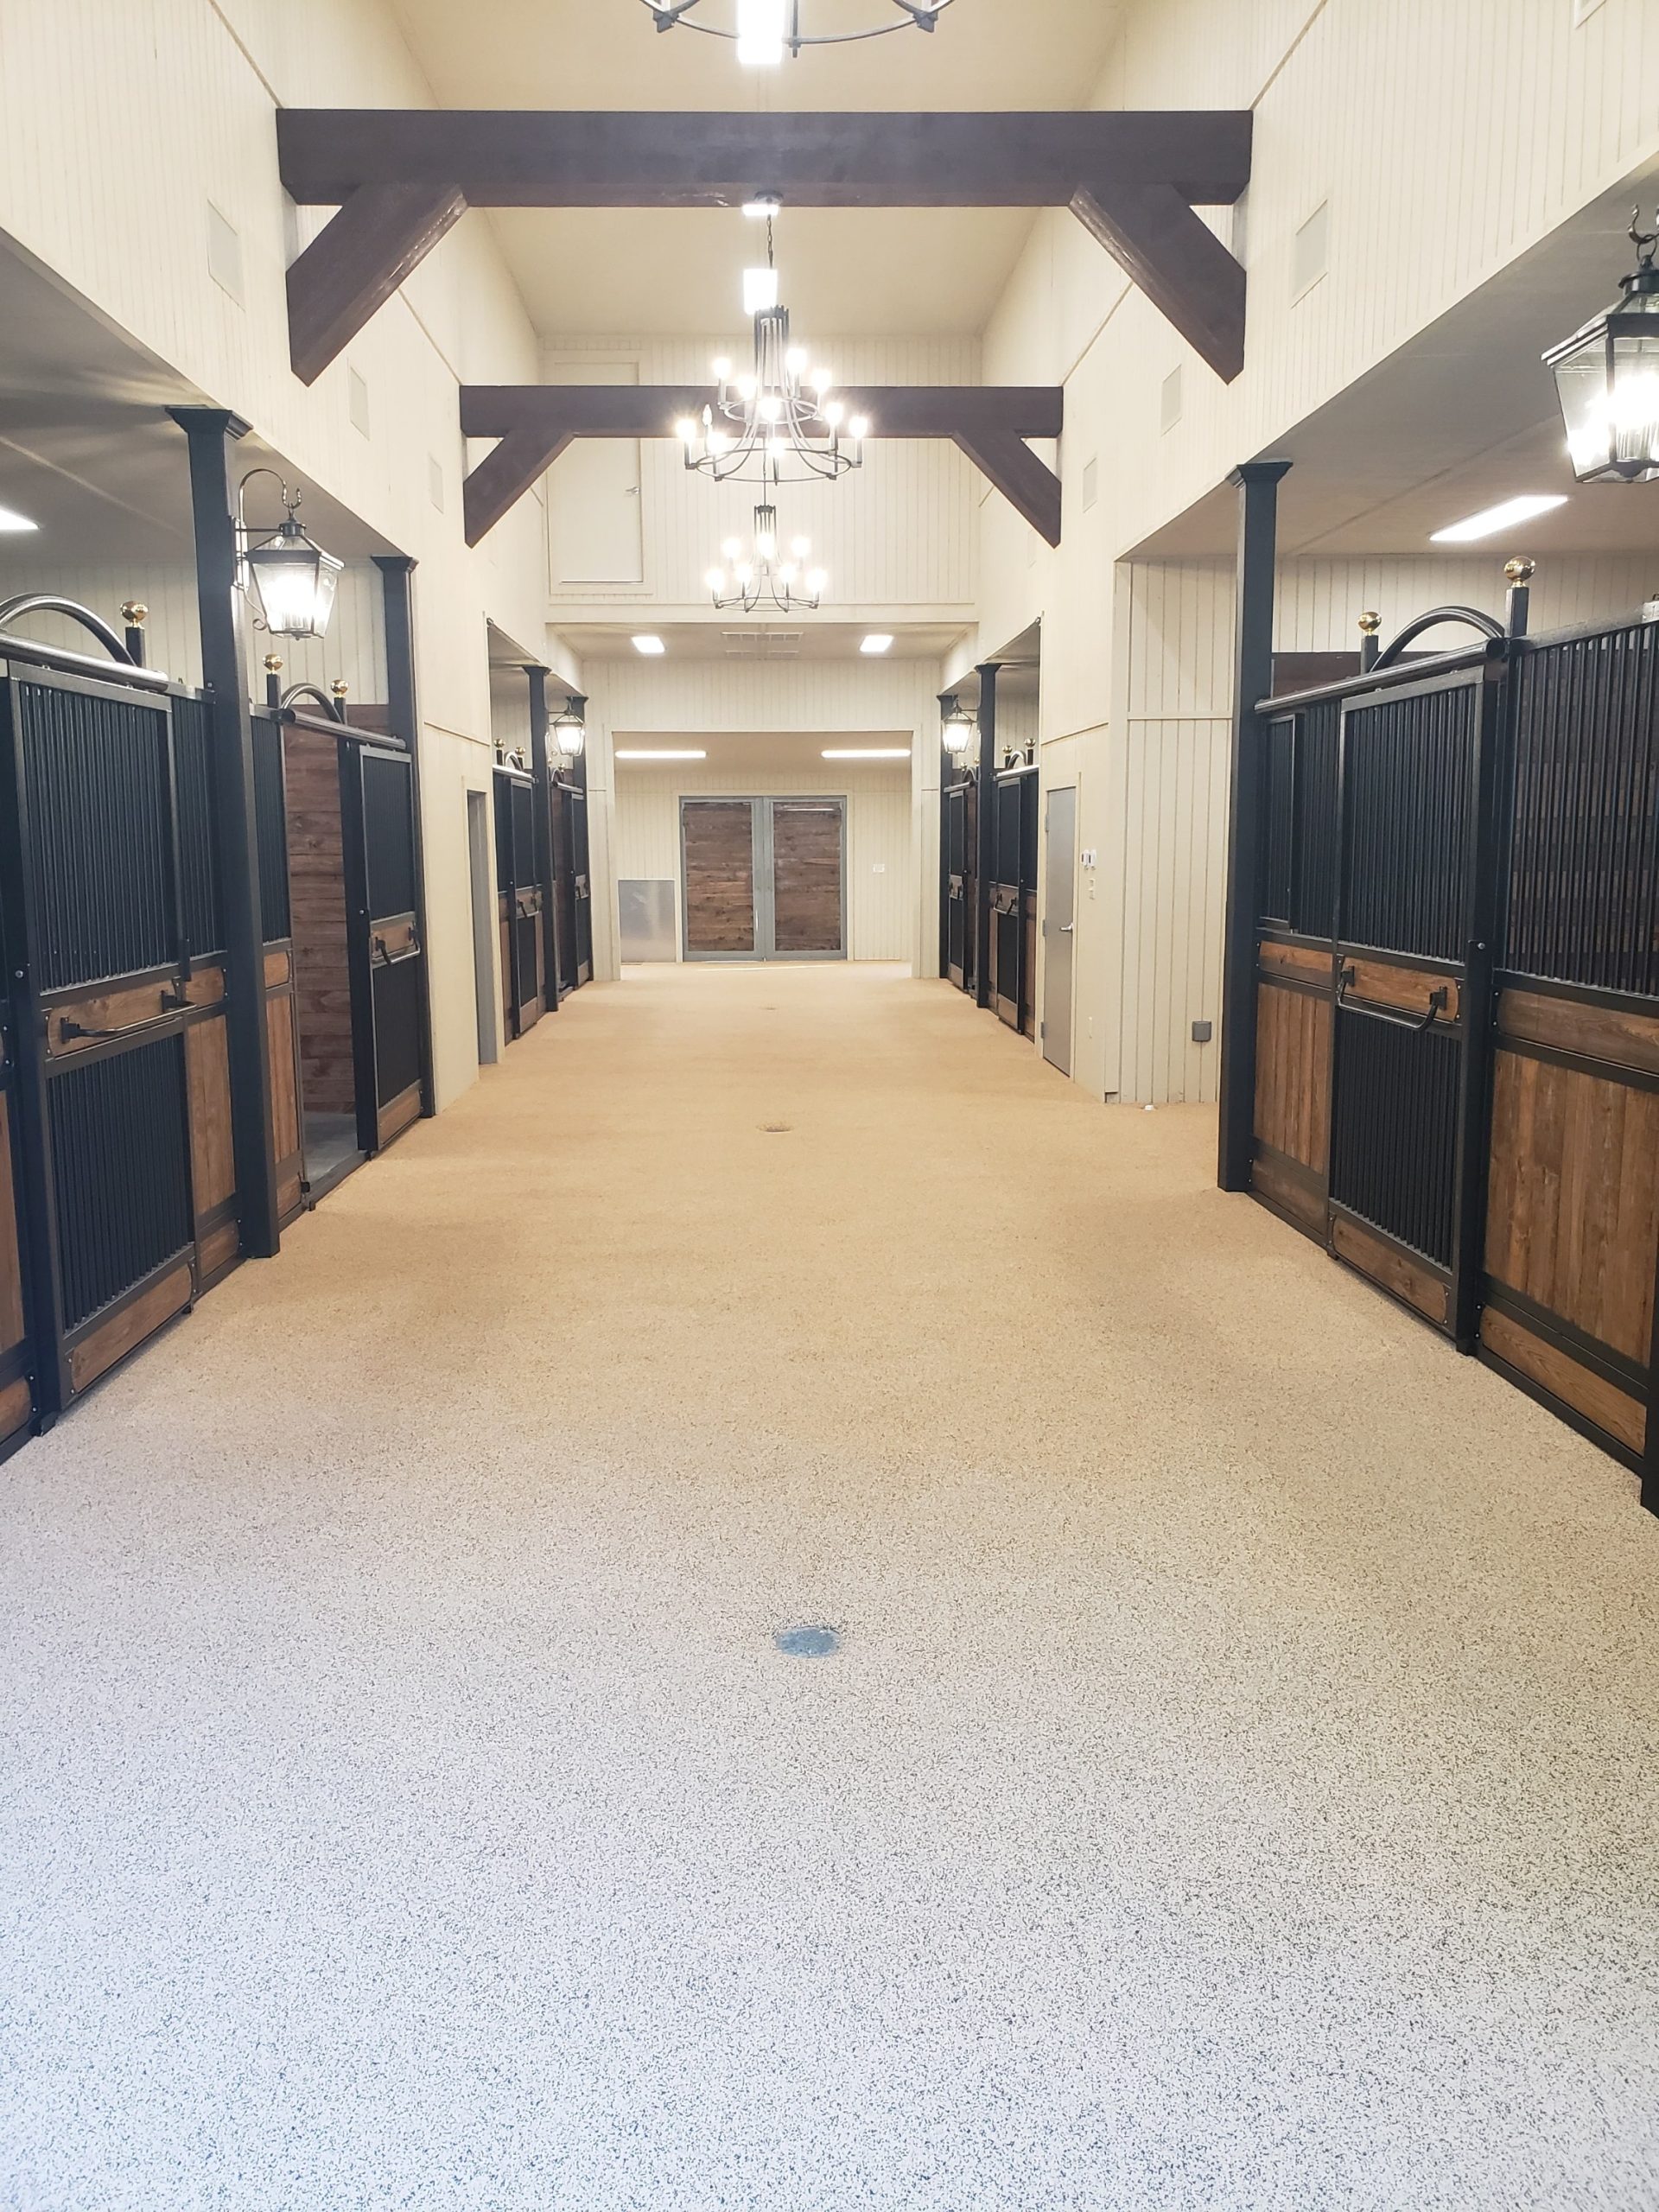 stables with rubber surfacing